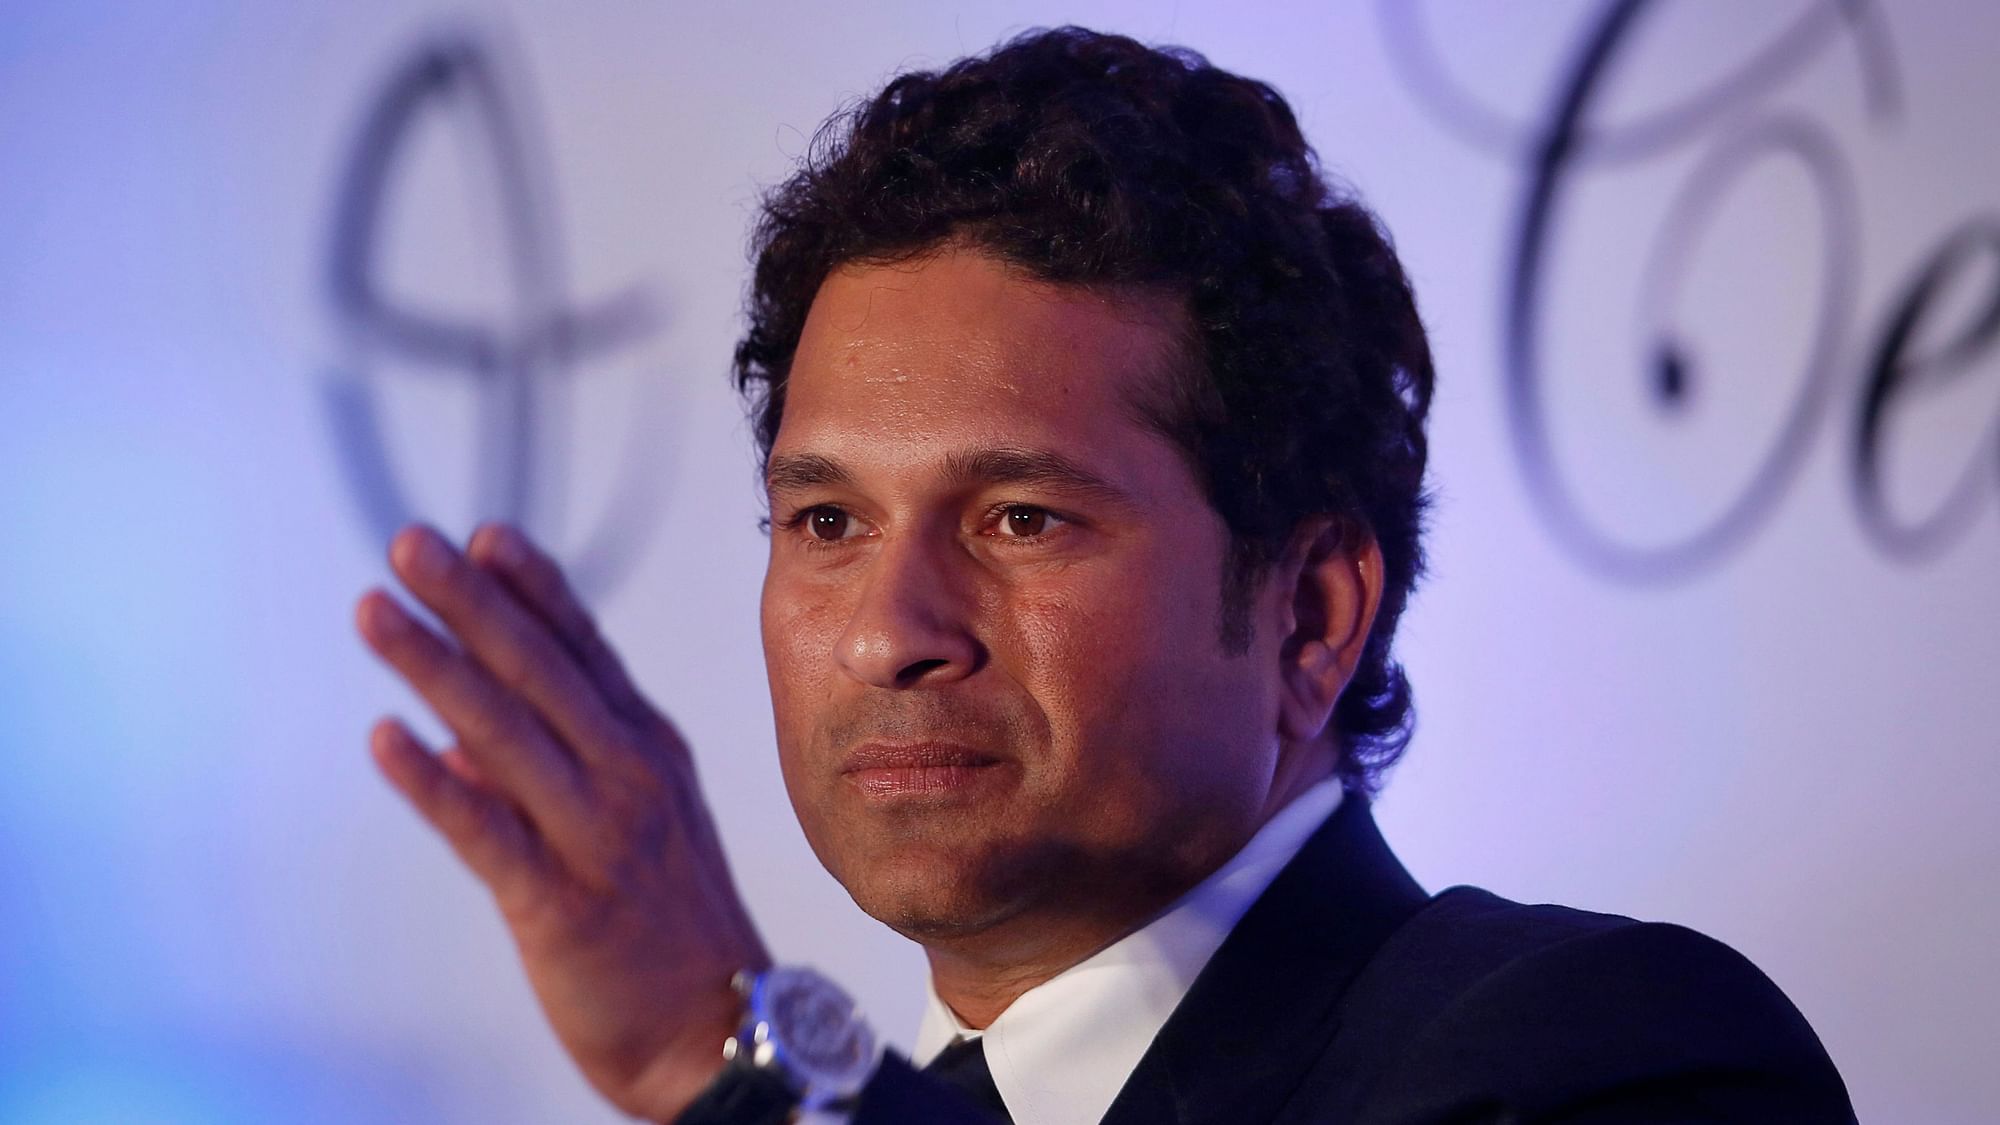 Sachin Tendulkar has sought help on Twitter for finding a waiter whose advice led him to redesign his elbow guard.